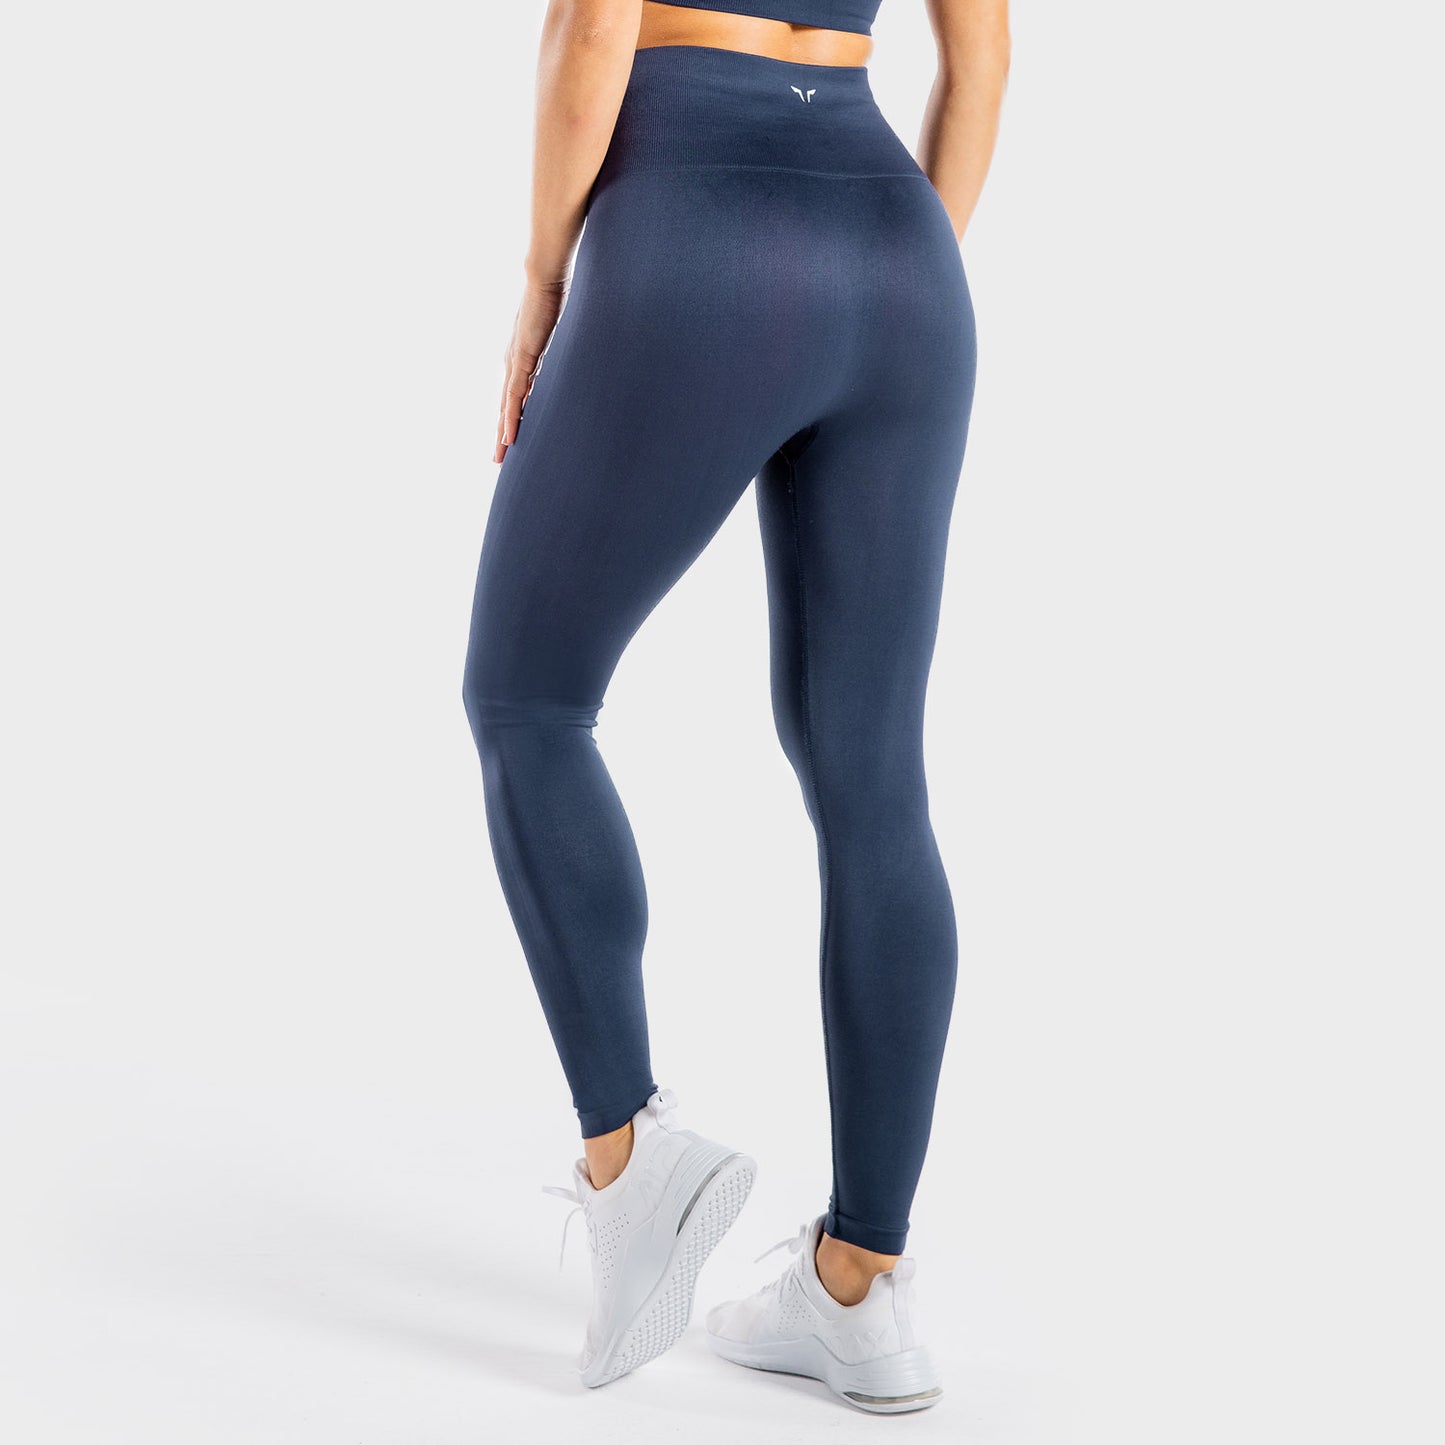 squatwolf-gym-leggings-for-women-primal-leggings-navy-workout-clothes